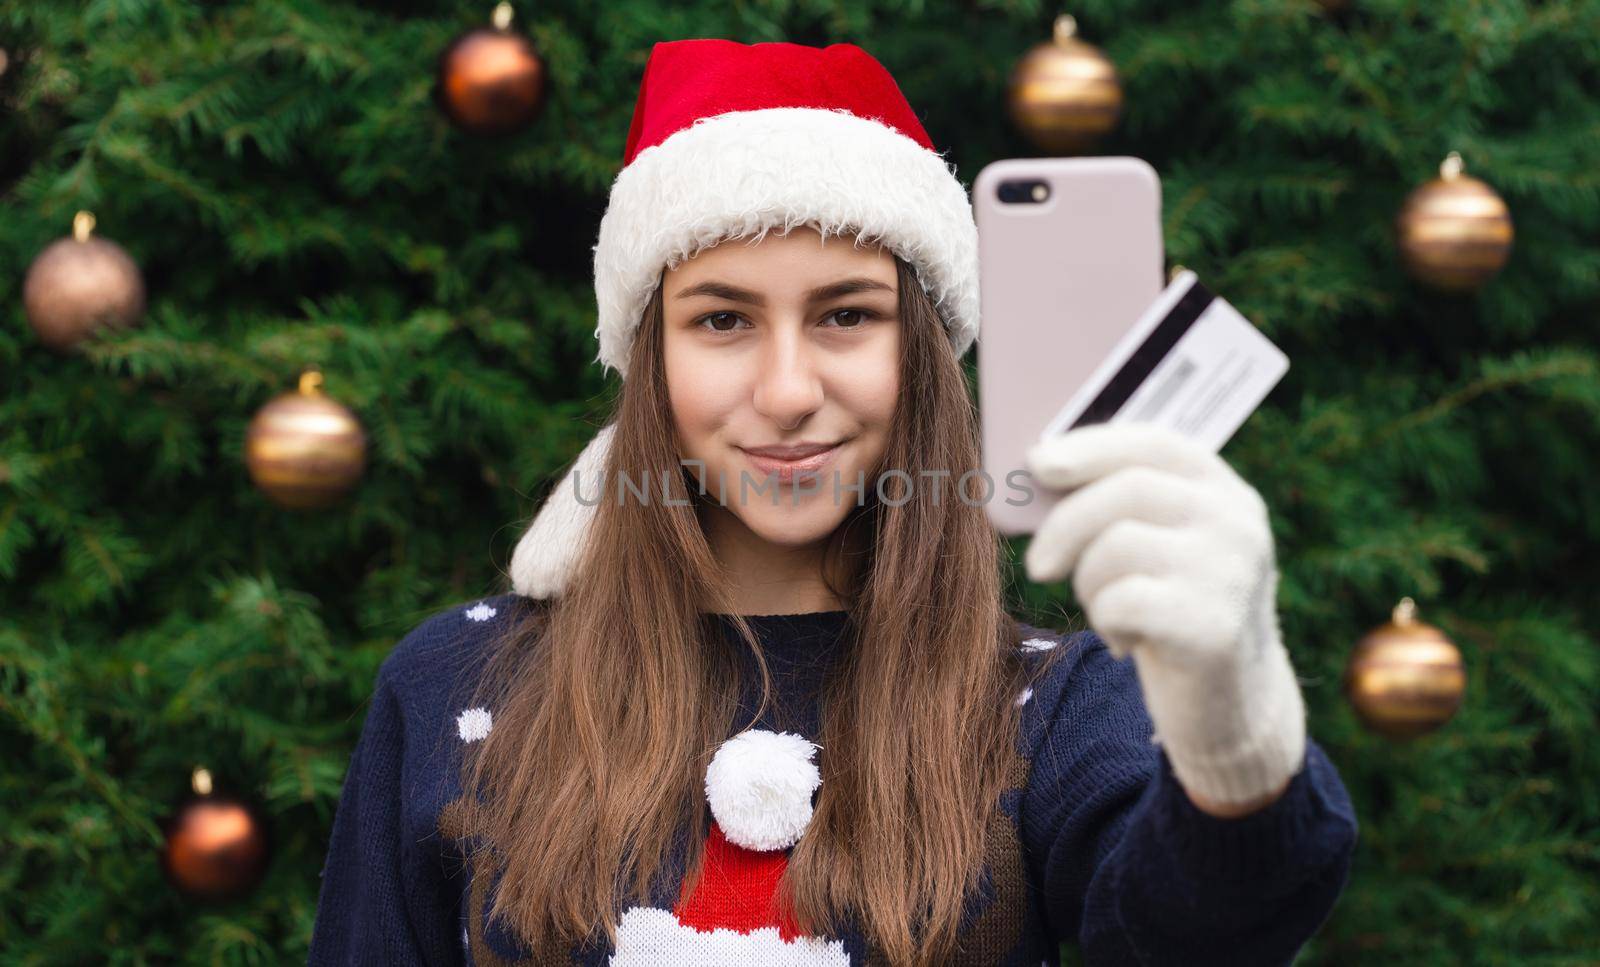 Christmas online shopping. A young girl in a santa claus hat and a blue sweater holding smartphone. Christmas during the coronavirus by lunarts